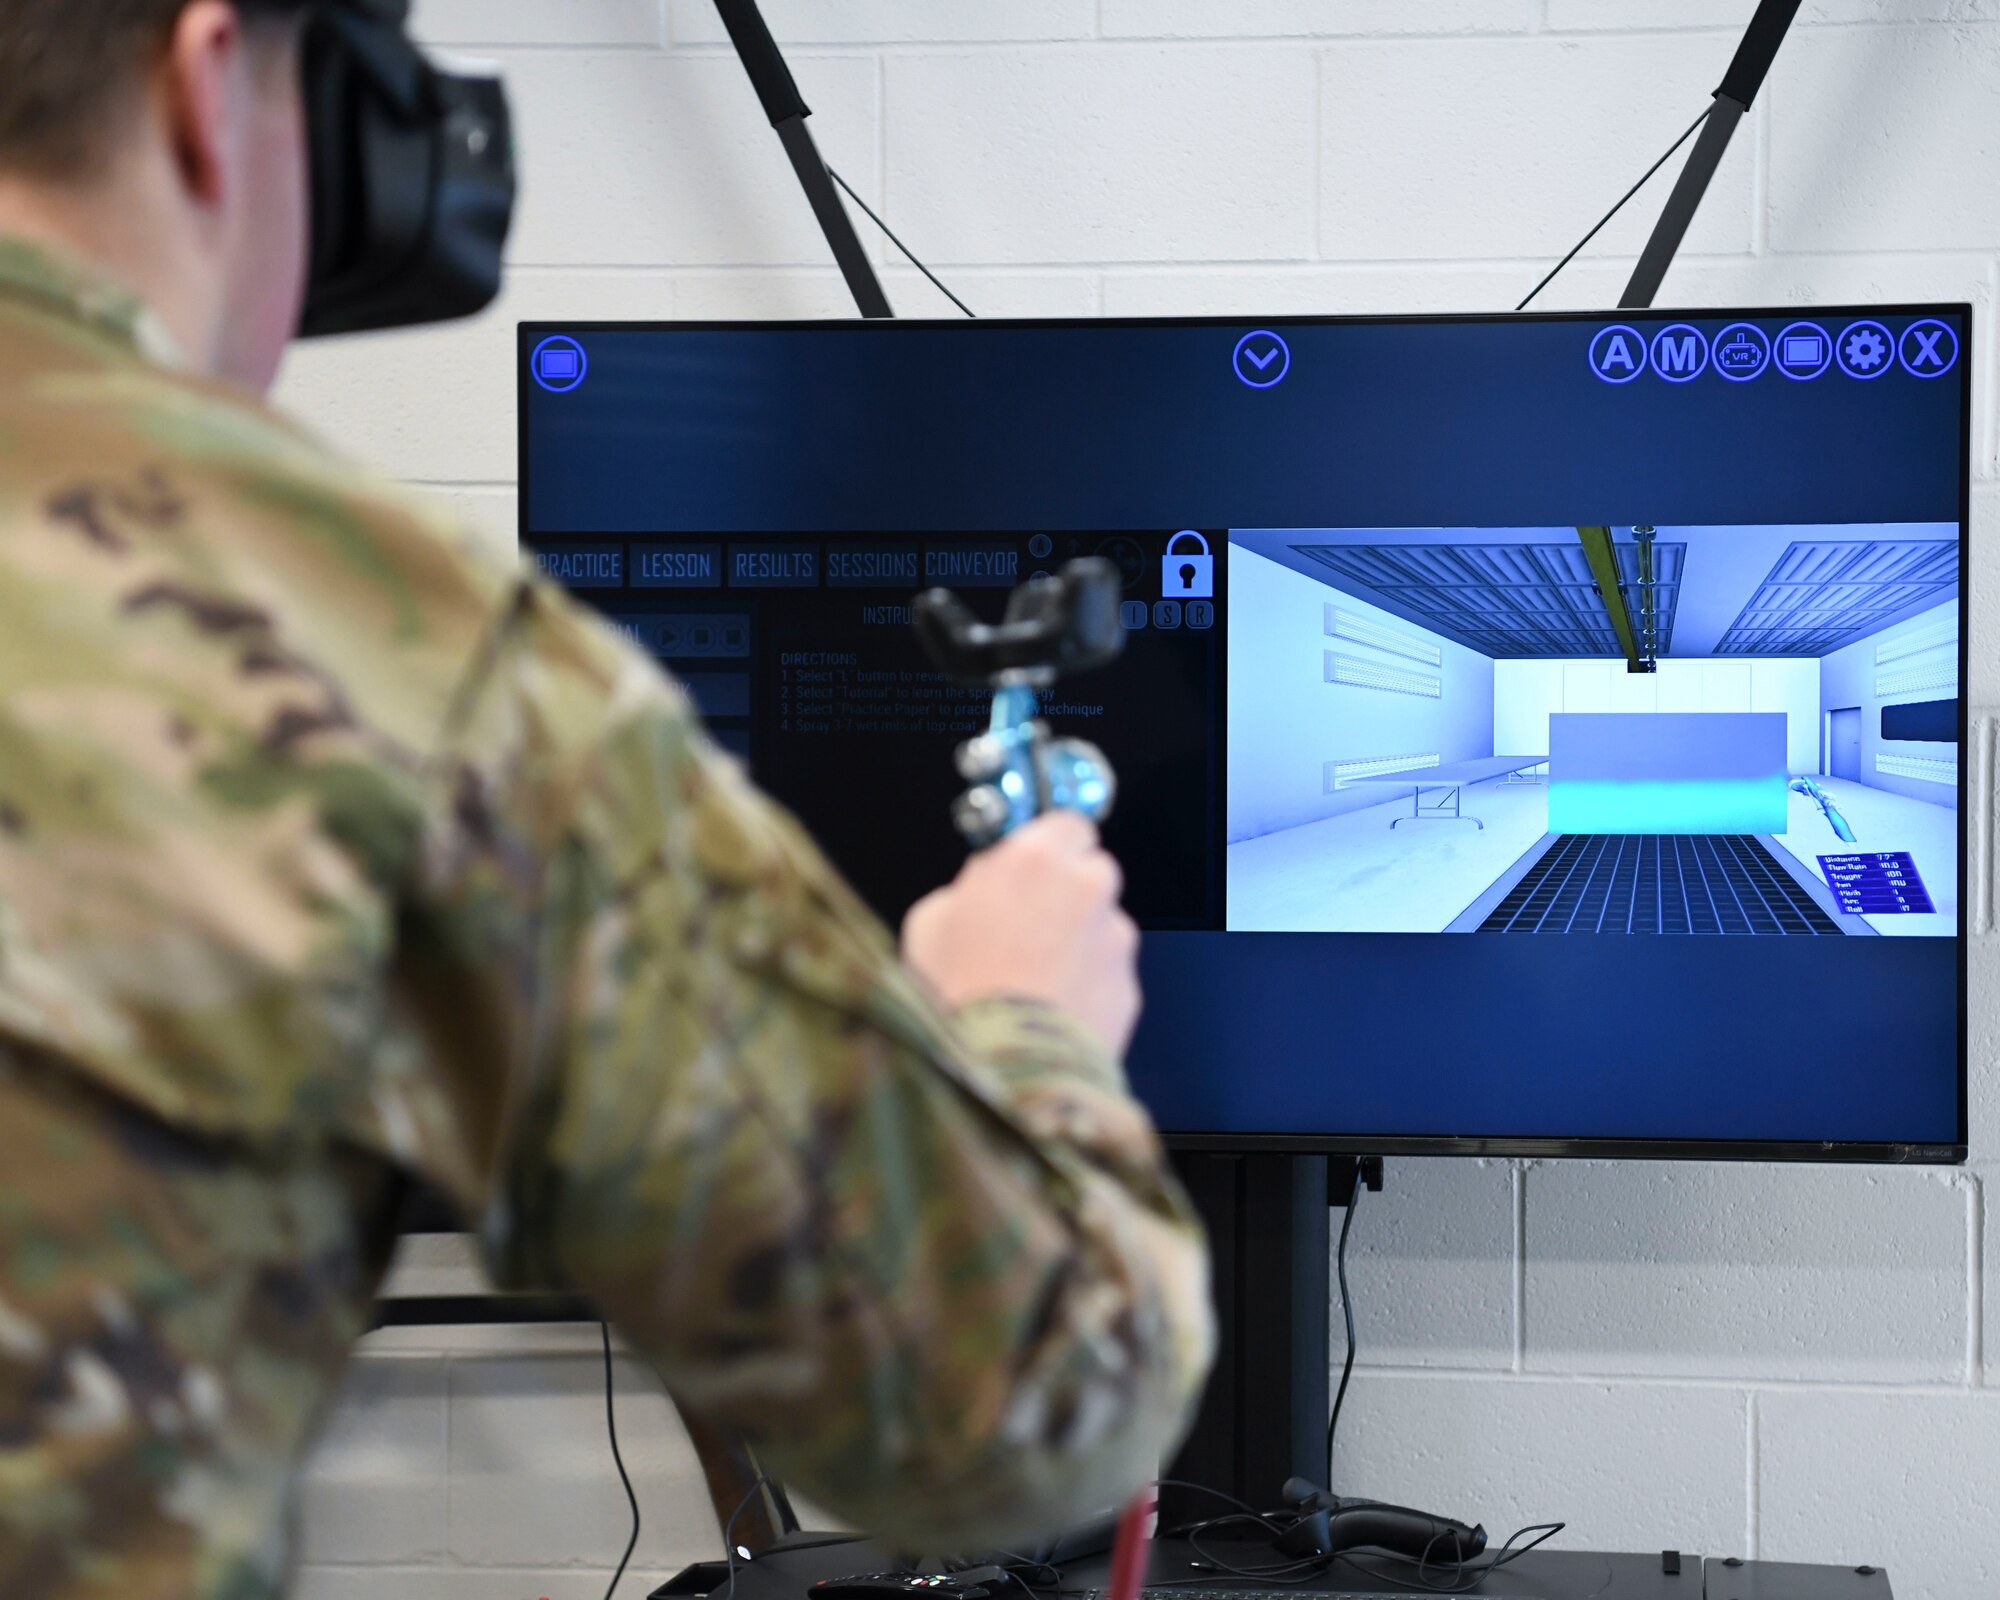 The photo is taken looking over an Airman's shoulder as he uses the virtual reality painting booth for his training.